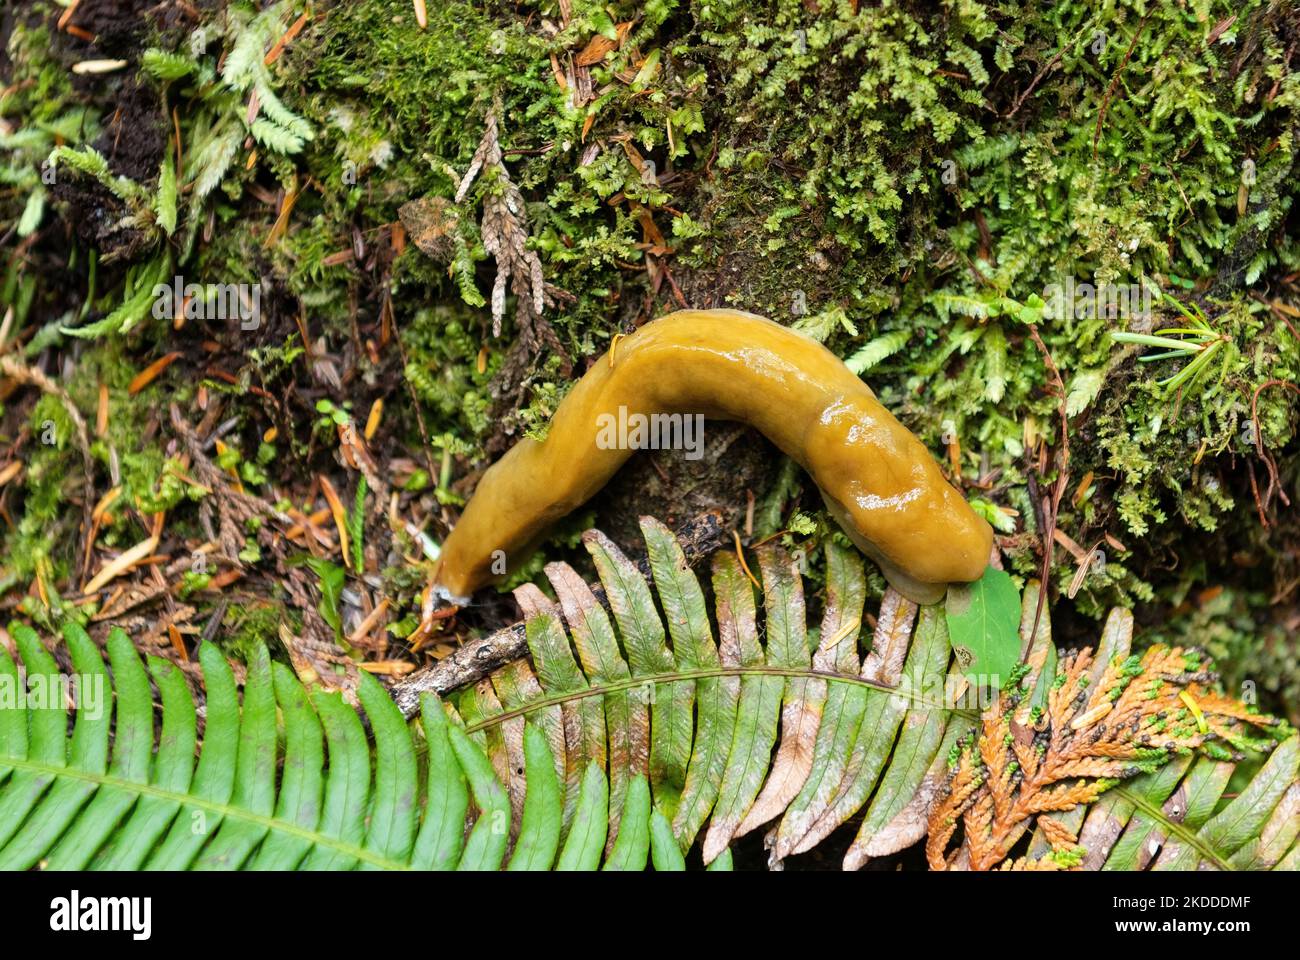 Banana slug (Ariolimax) in the temperate rainforest of continental British Colombia and Vancouver Island, Canada. Stock Photo